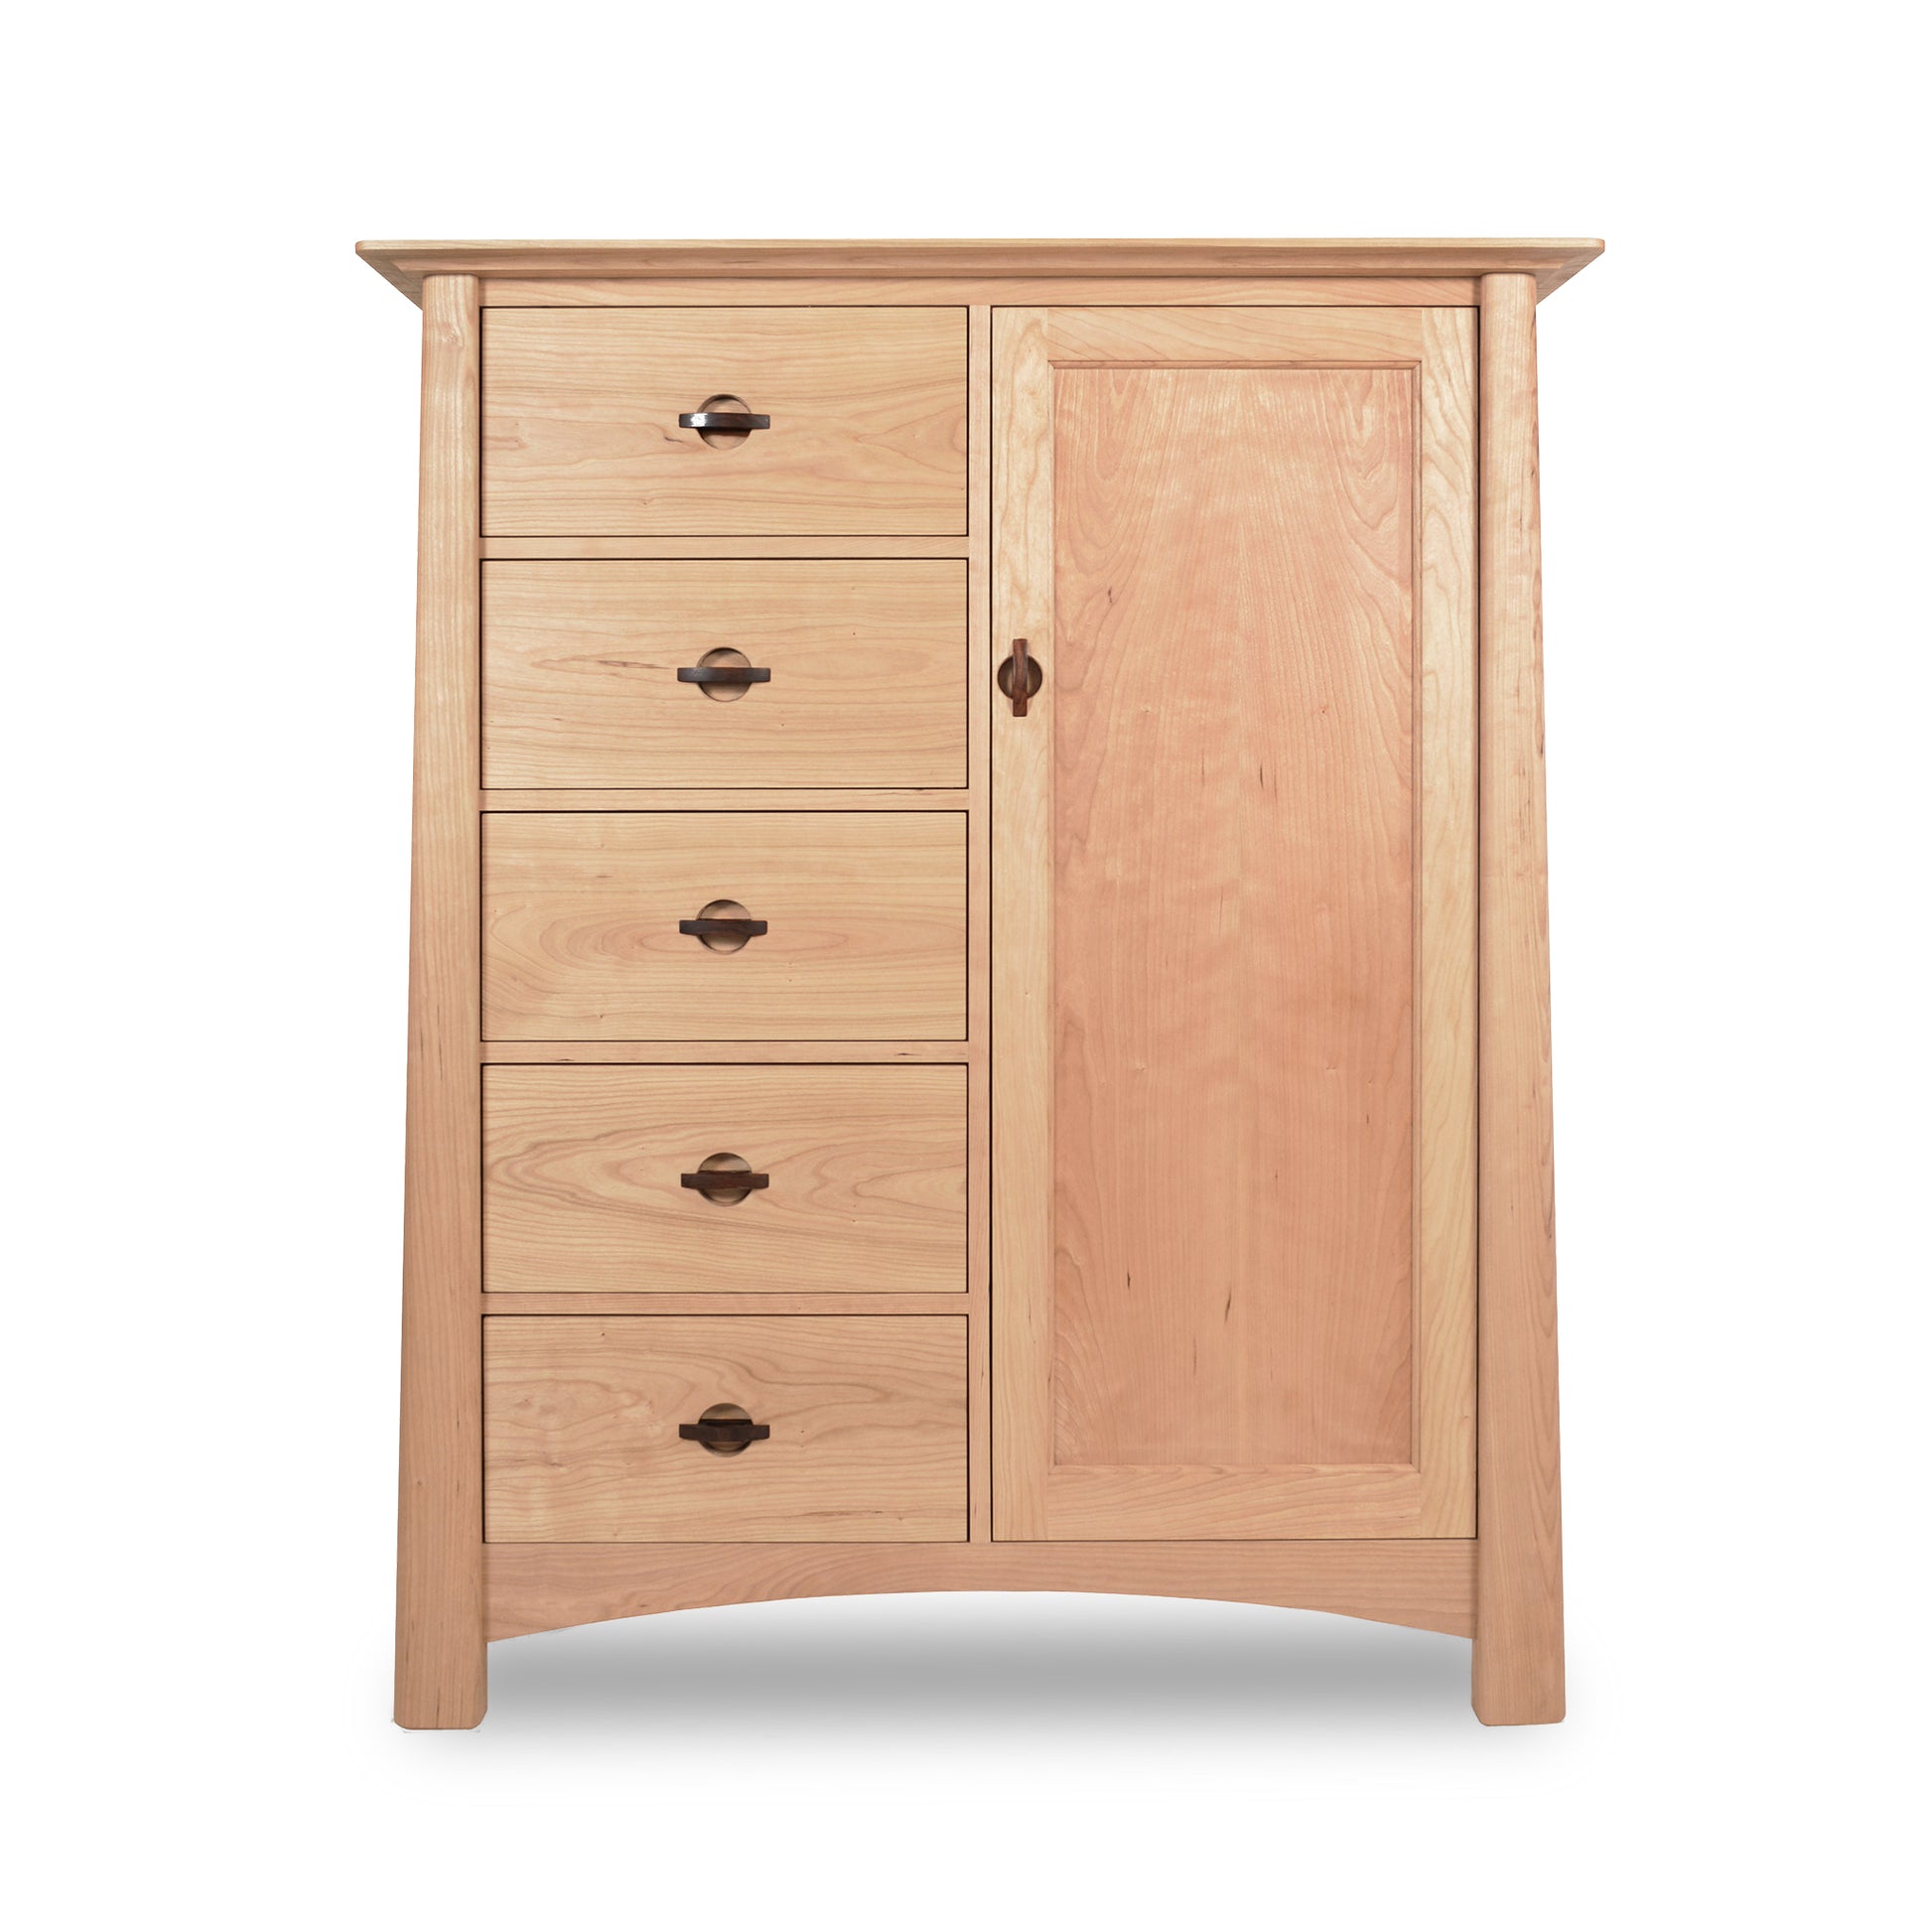 Maple Corner Woodworks Cherry Moon Sweater Chest: Sustainably harvested solid woods cabinet with four drawers on the left and a single door on the right, isolated on a white background, enhanced with an eco-friendly oil.